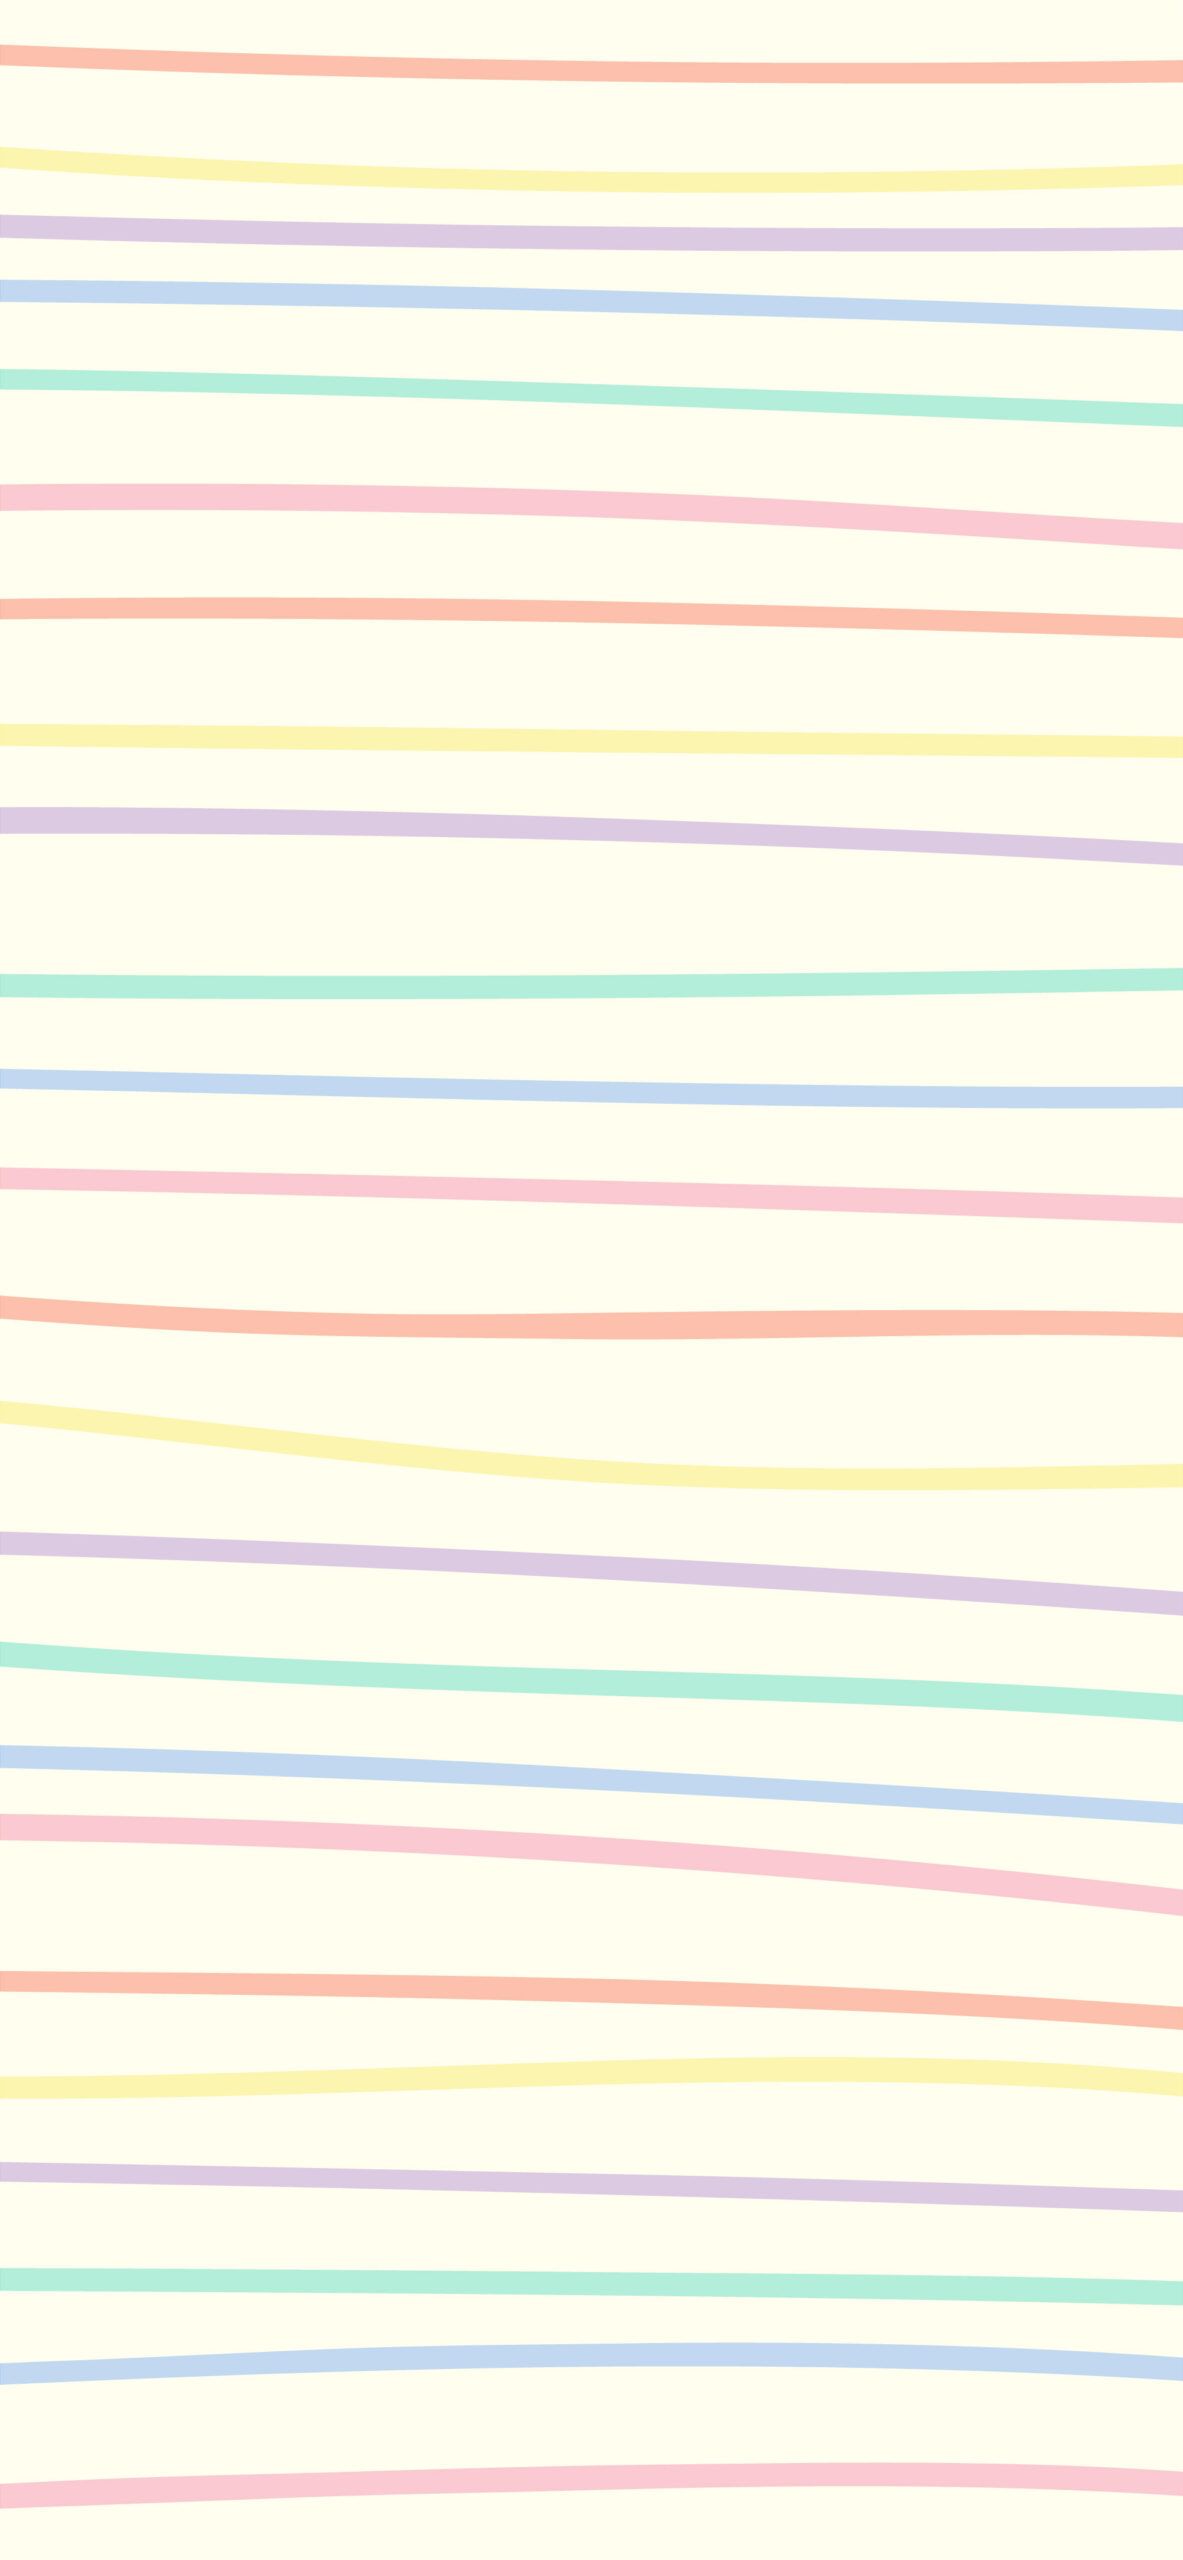 A striped background with horizontal lines in pastel colors - Pastel